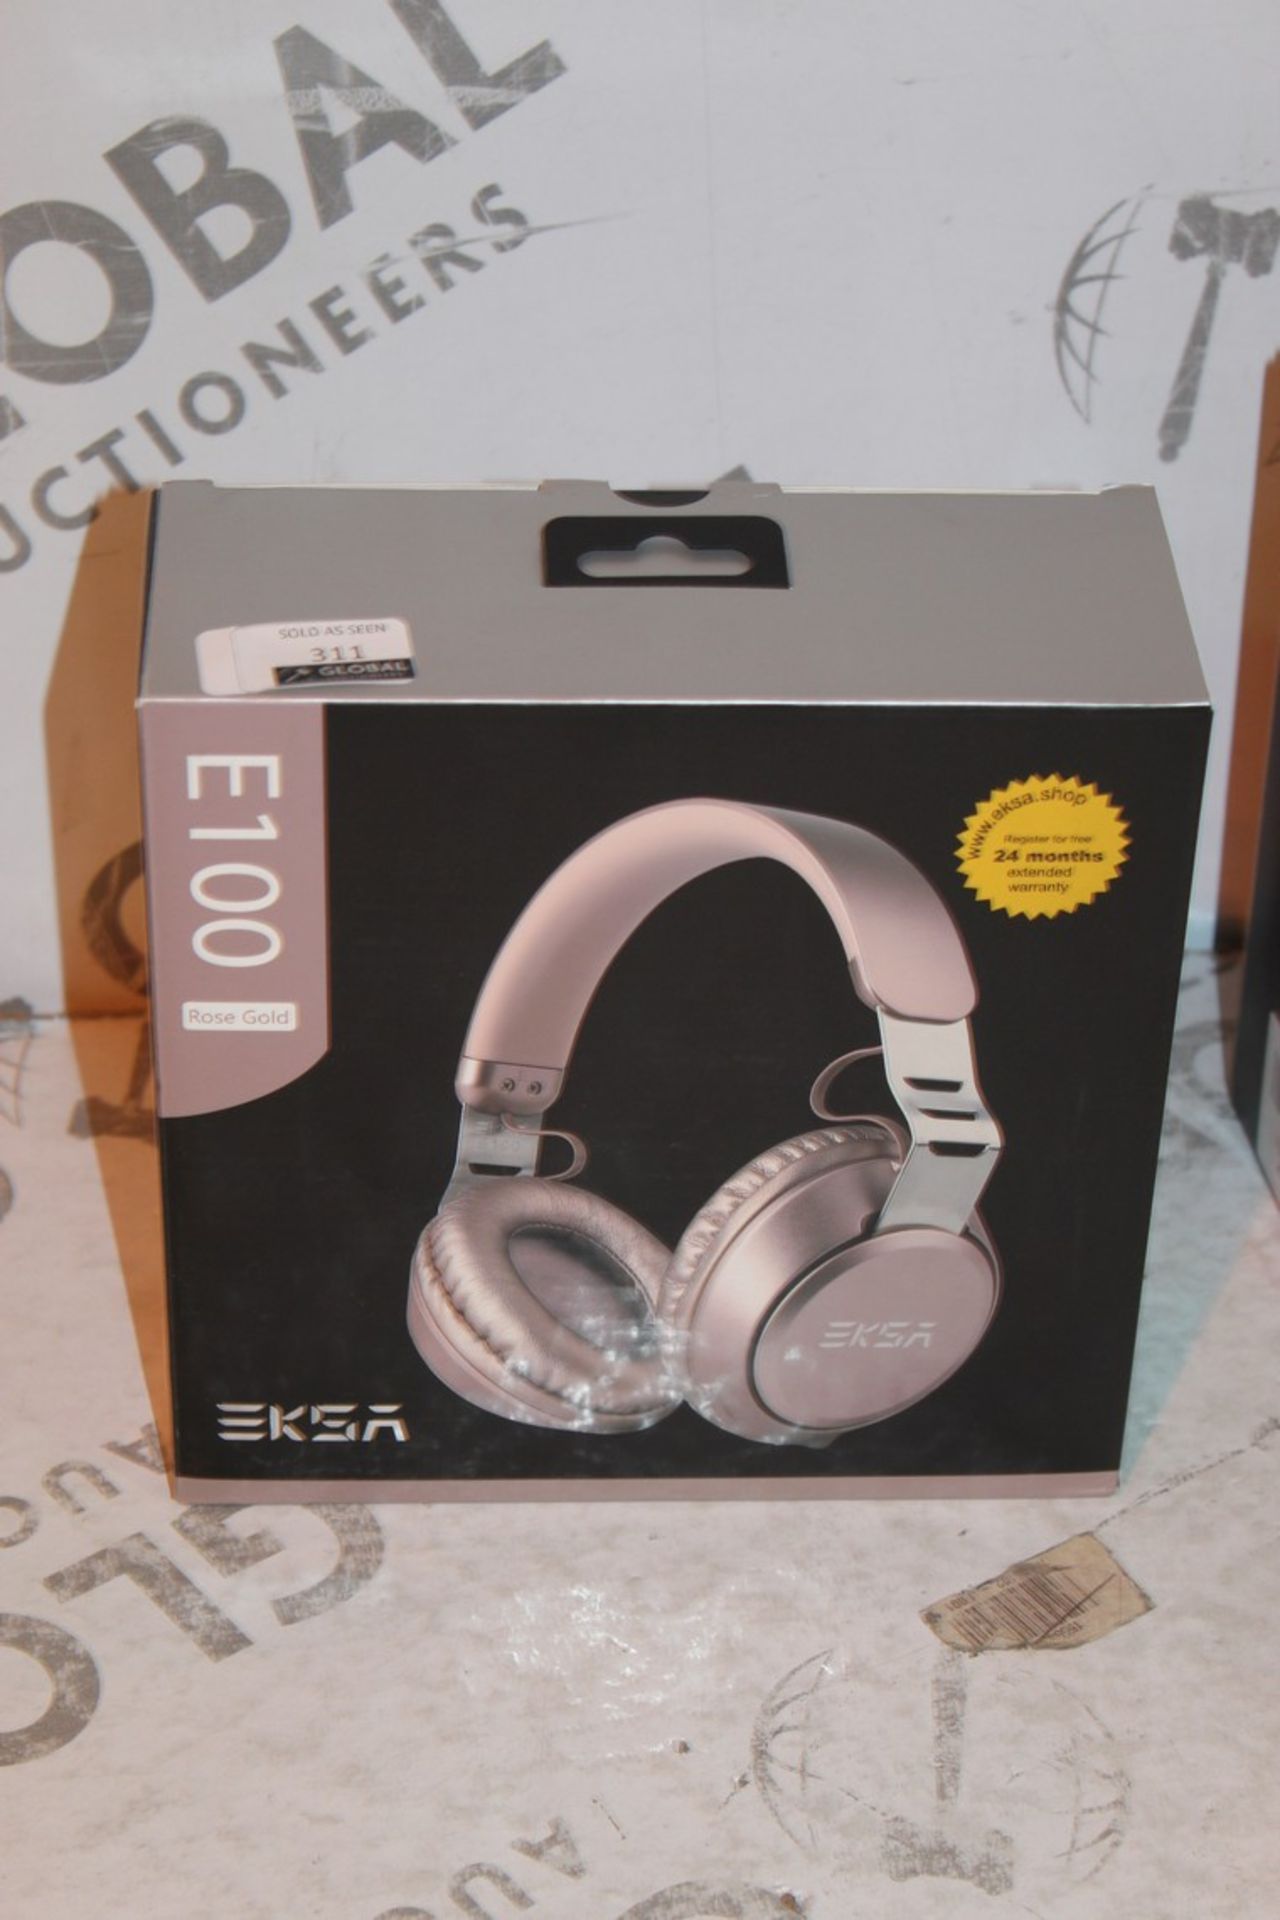 Boxed Pair E100 Rose Gold Wireless Headphones RRP £45 (Pictures Are For Illustration Purposes